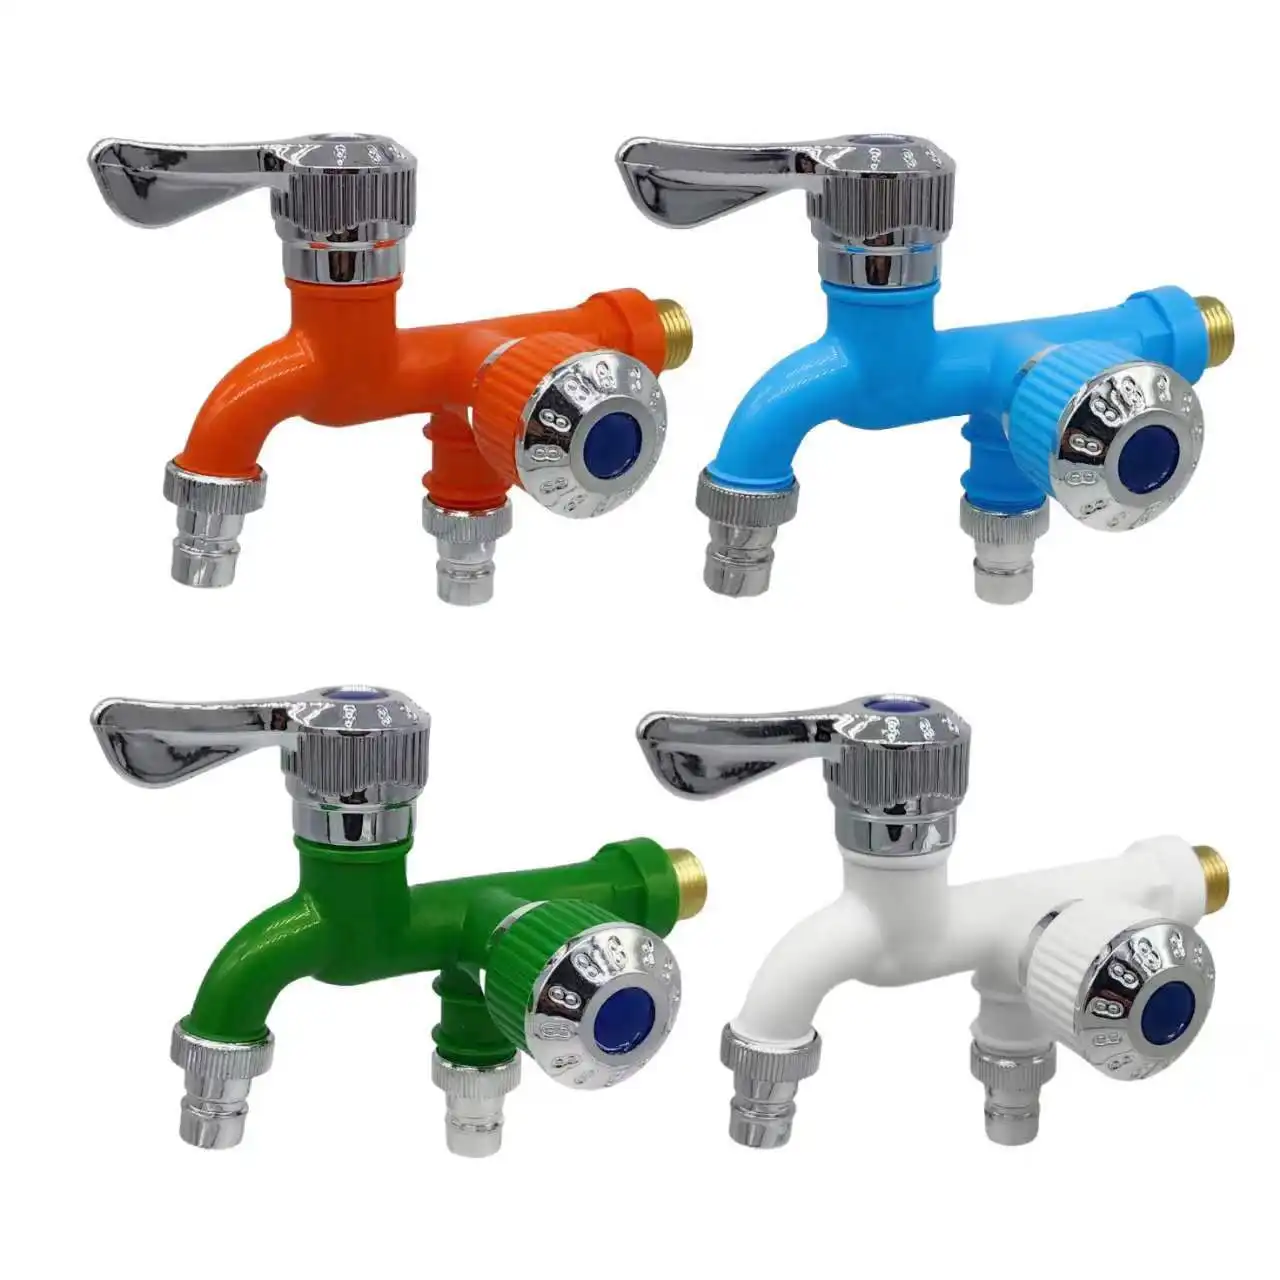 Faucet Double Outlet Dual Control Water Tap Home Bathroom Hose Irrigation Fitting Plastic Connector 1/2" Universal Interface